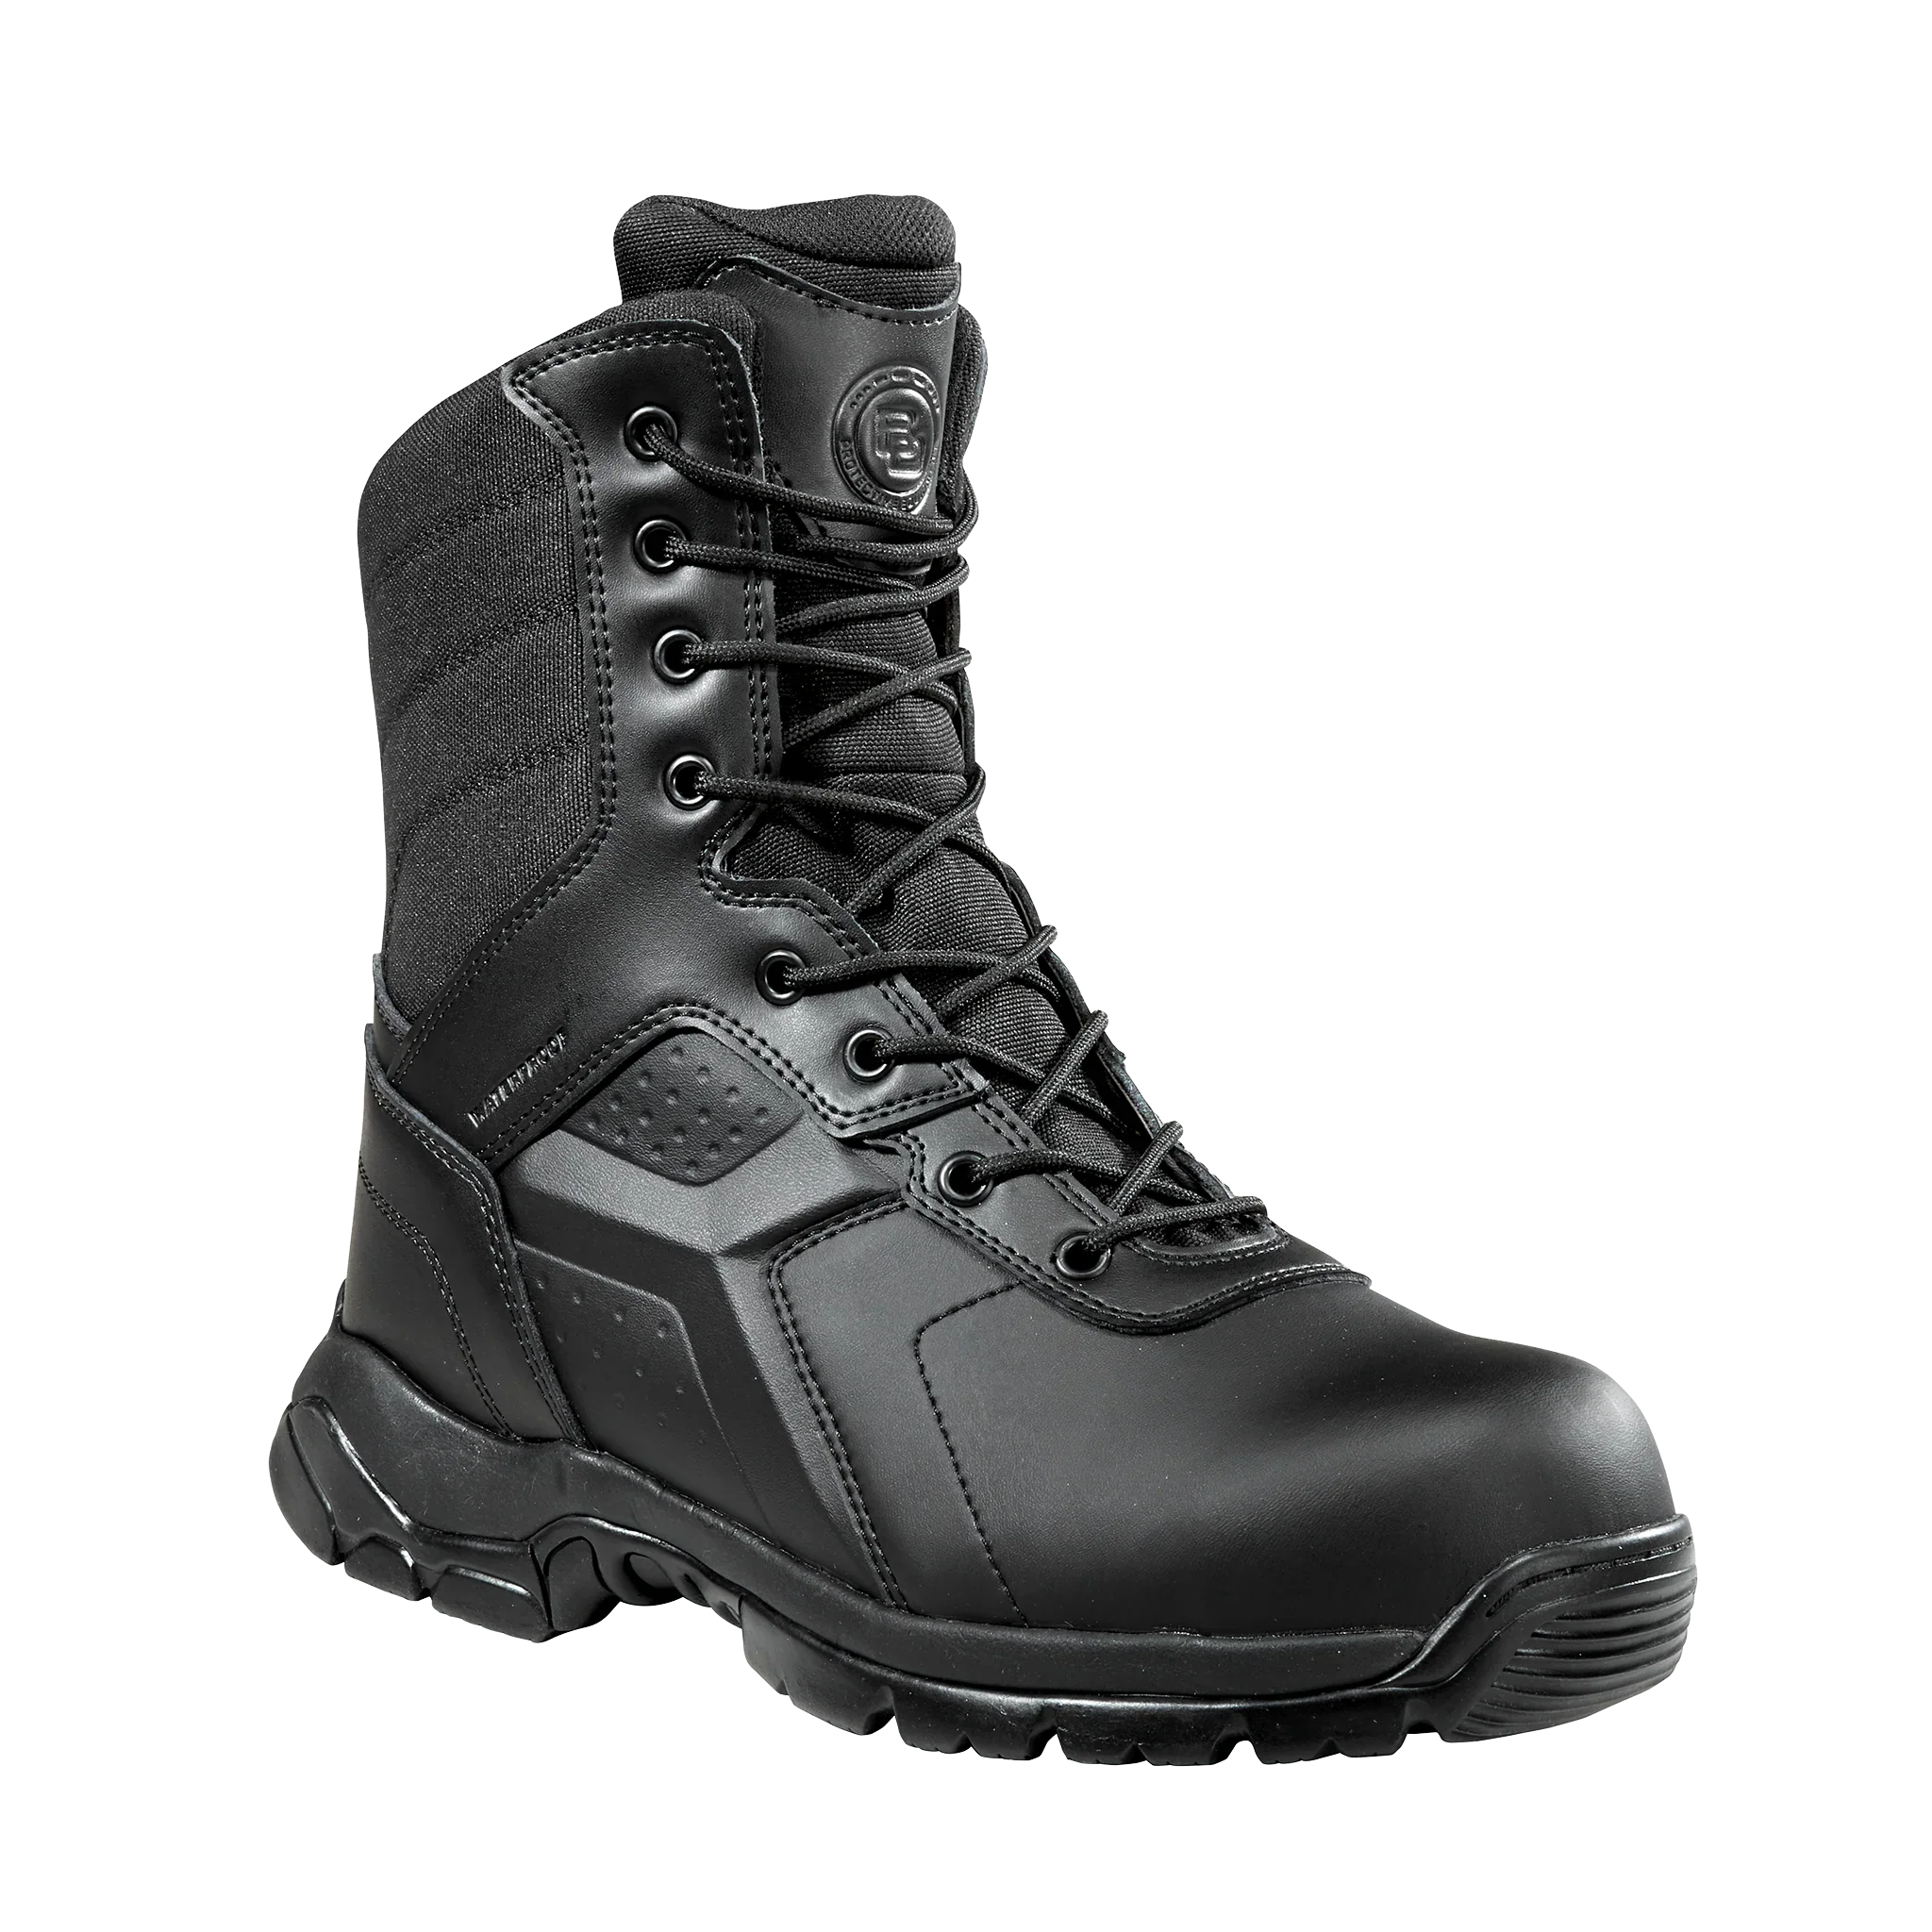 Tactical Black Boots with Safety Toe